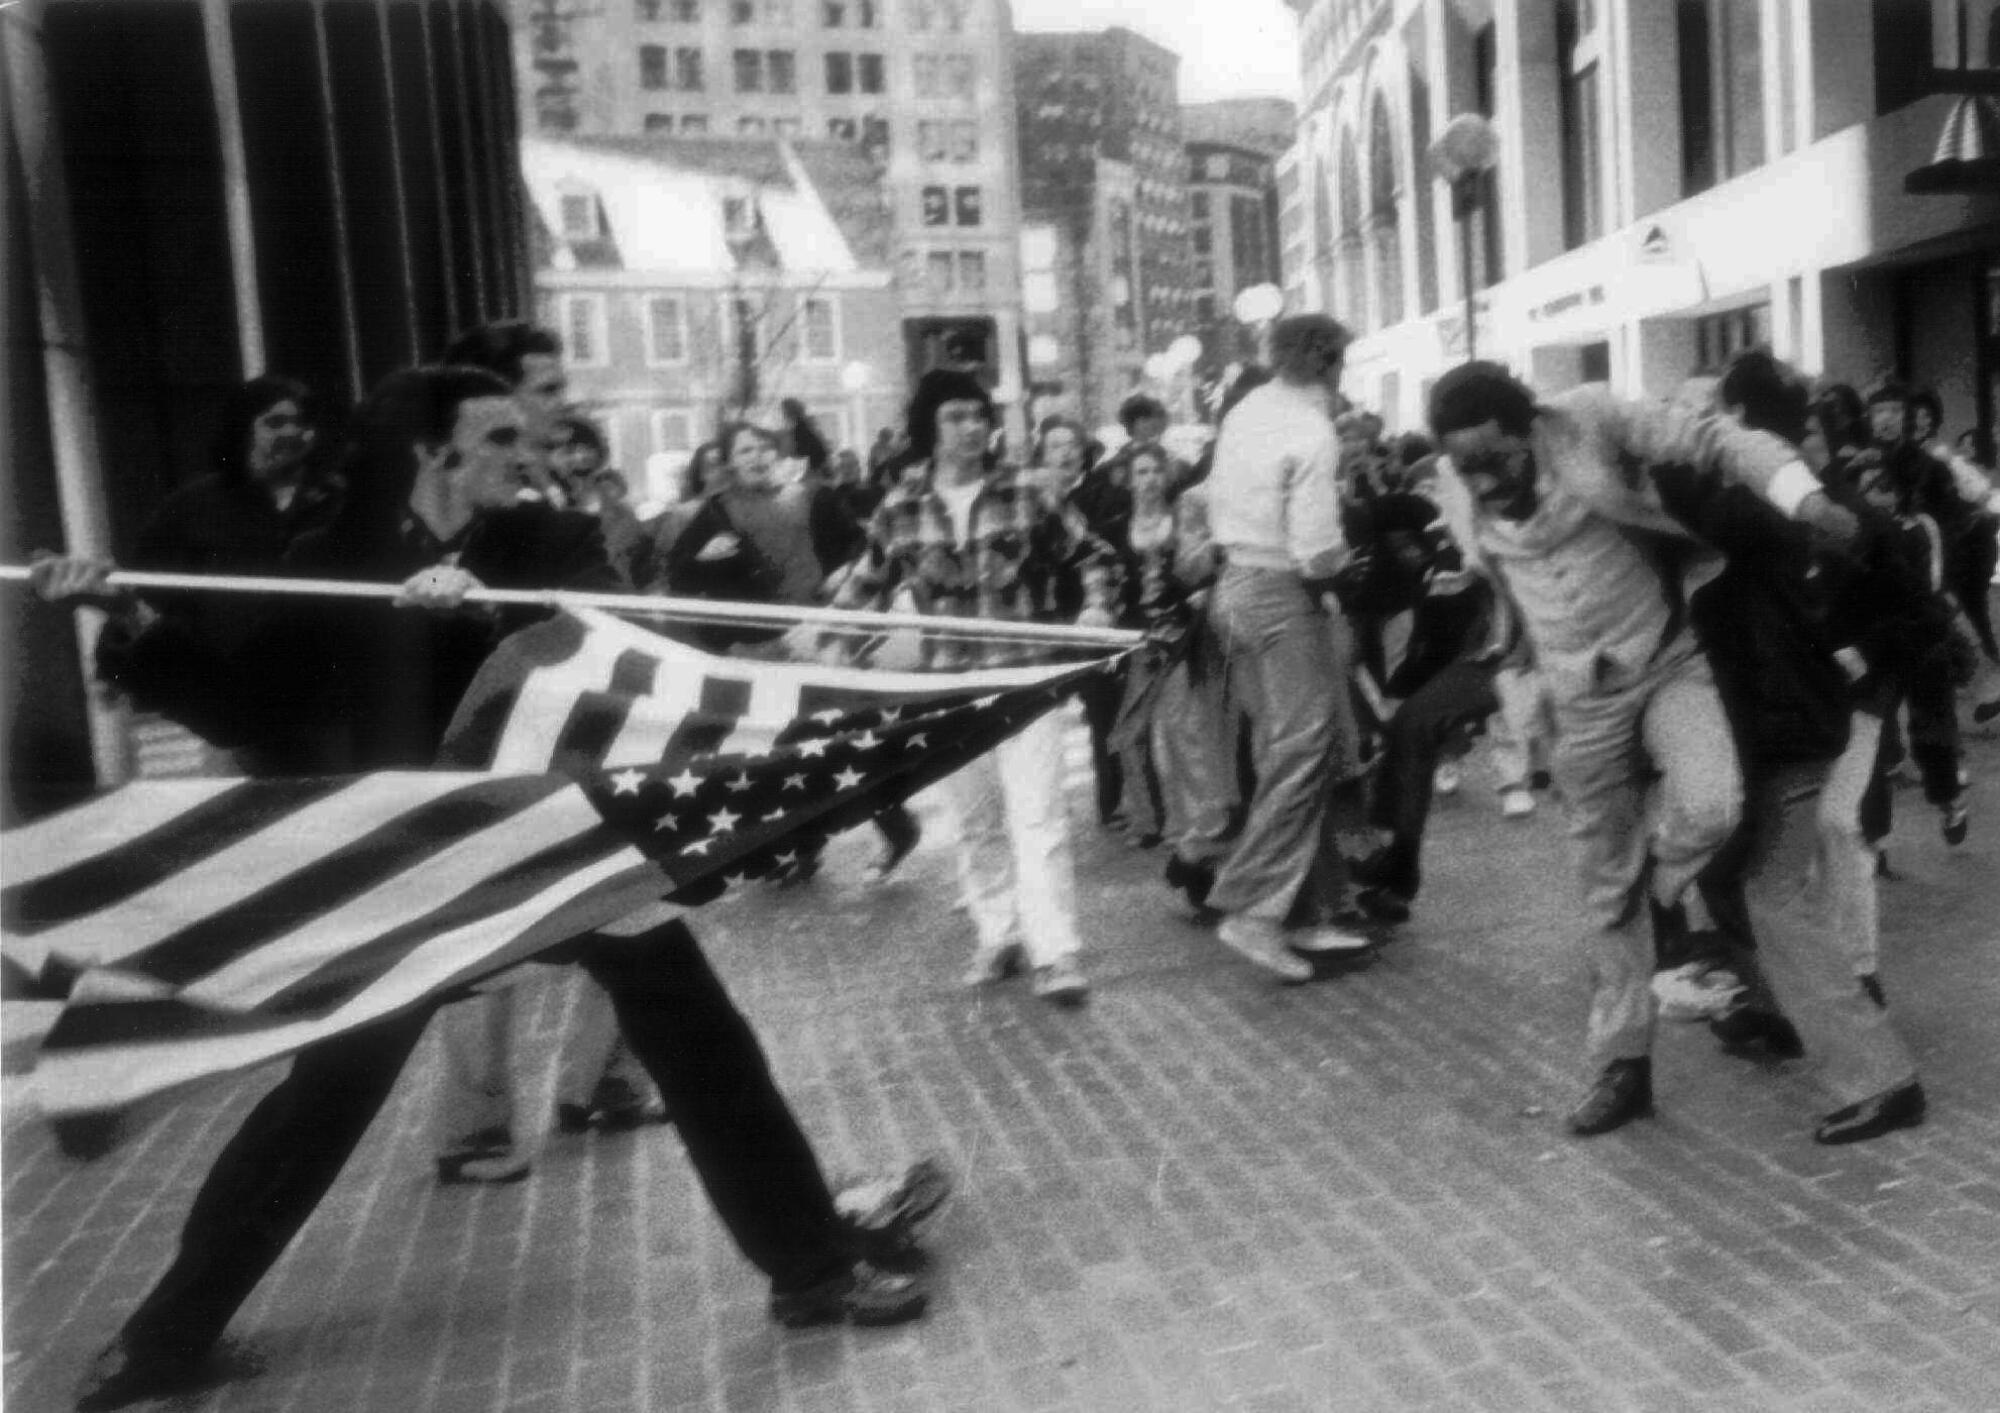 A white anti–busing demonstrator uses an American flag to attack a Black man